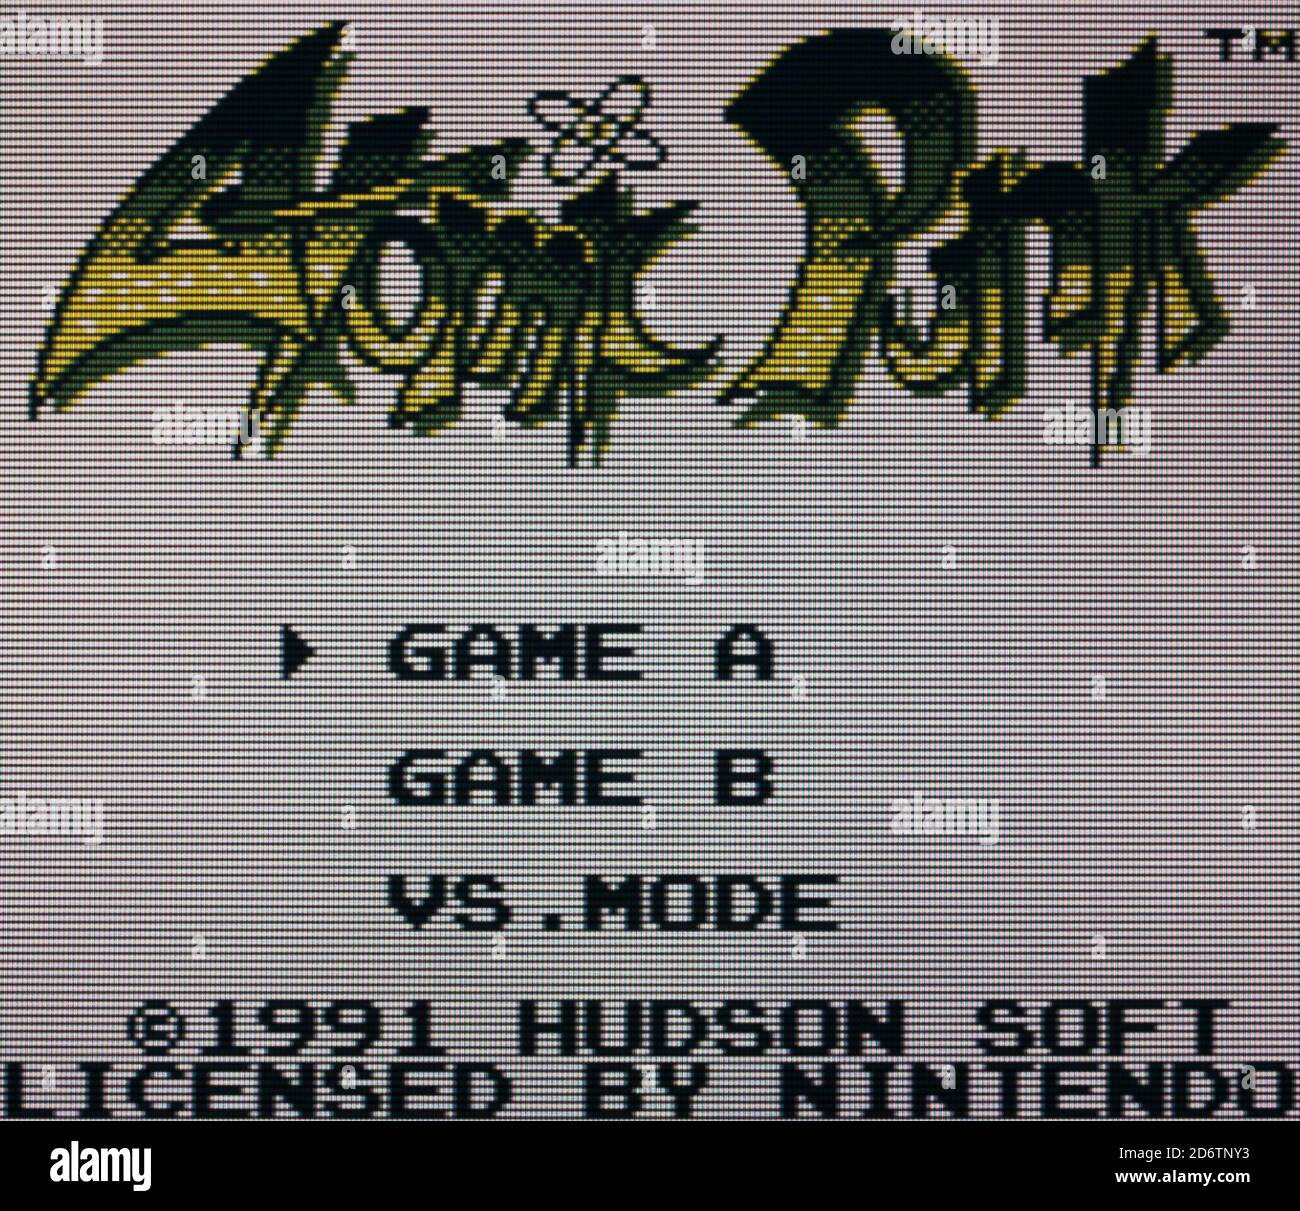 Atomic Punk - Nintendo Gameboy Videogame - Editorial use only Stock Photo